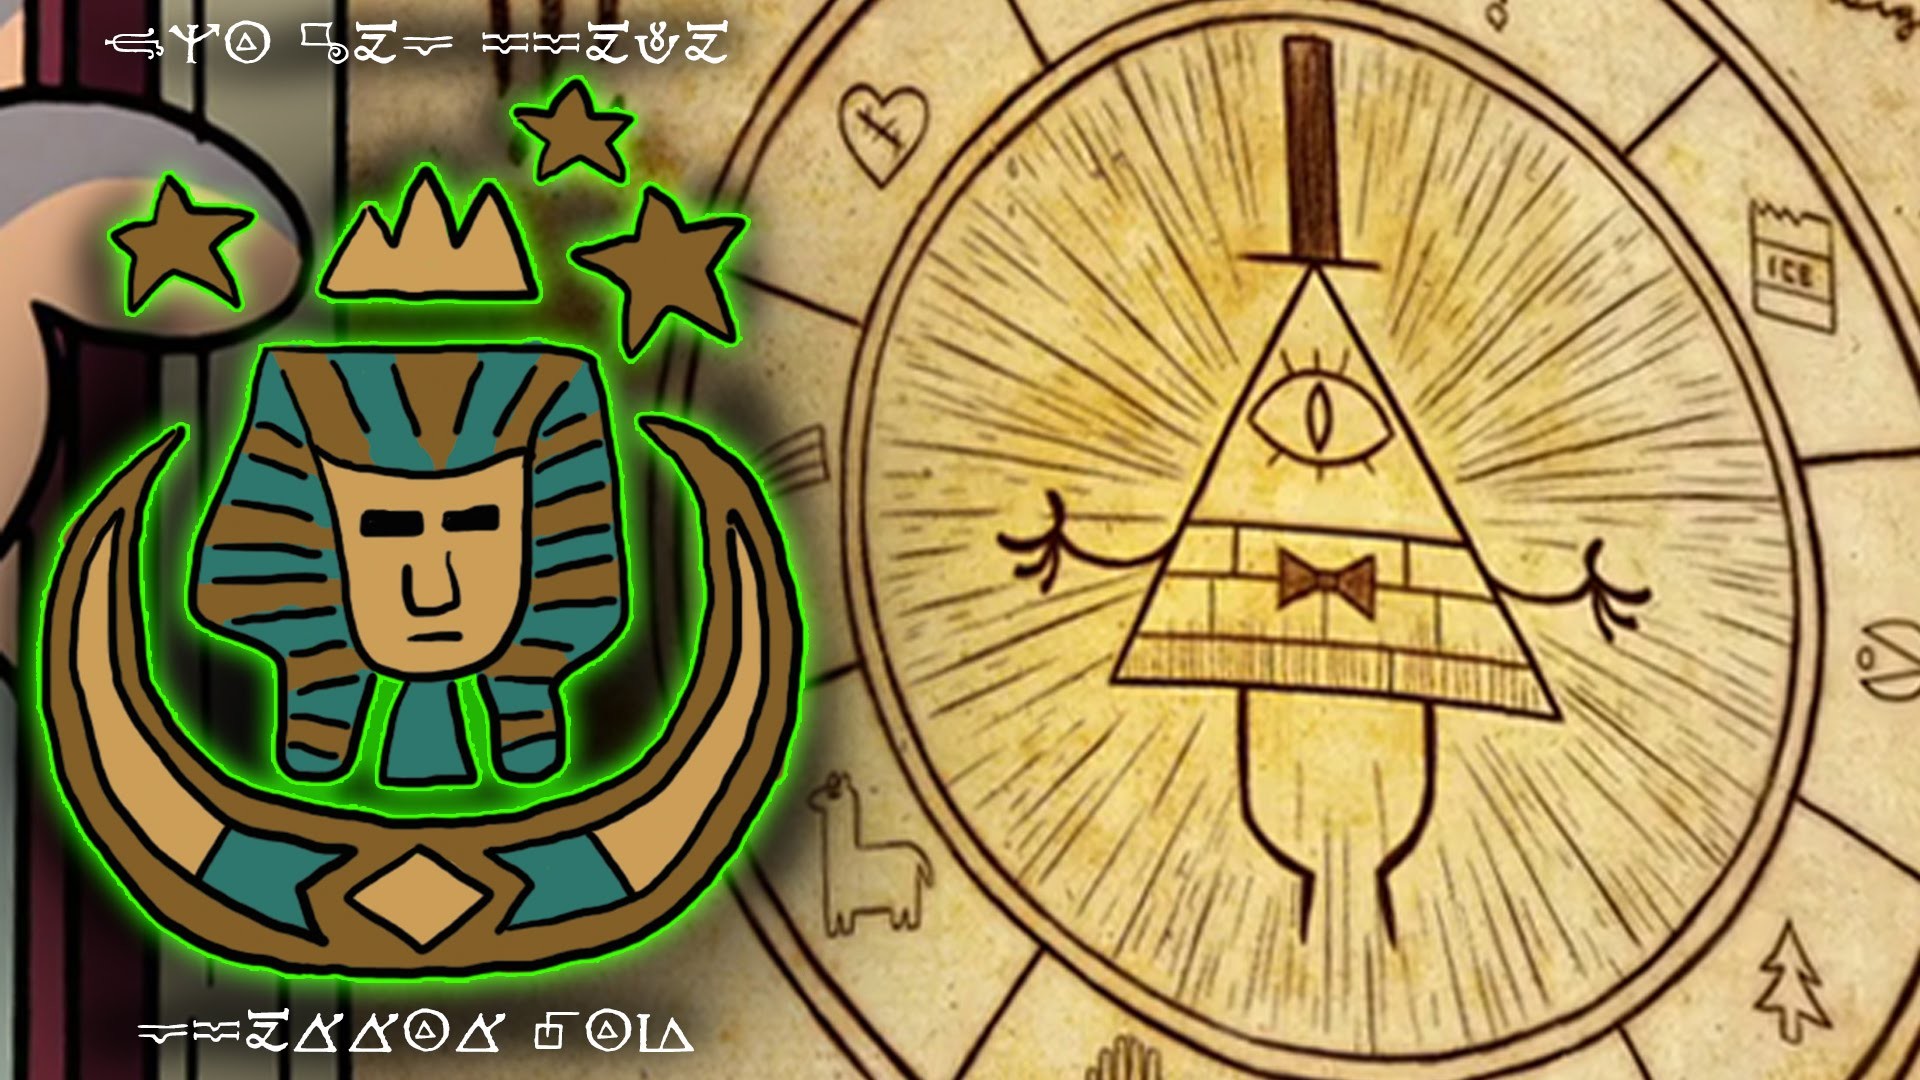 1920x1080 BILL CIPHER'S WHEEL (Gravity Falls) The Royal Order of the Holy Mackerel -  YouTube